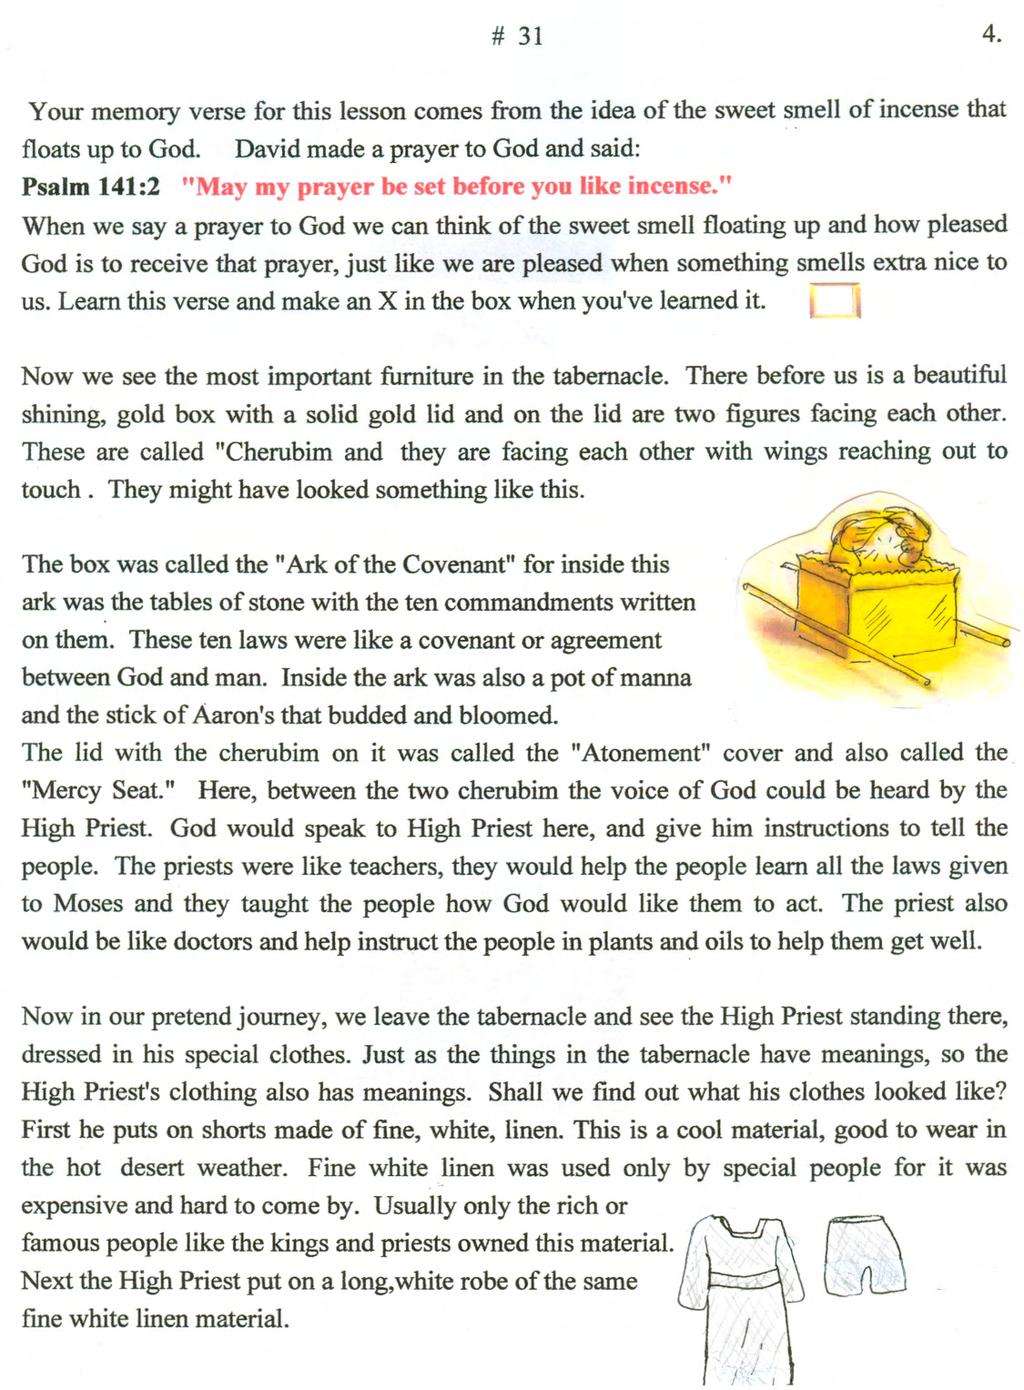 # 31 4. Your memory verse for this lesson comes from the idea of the sweet s~ell of incense that floats up to God.